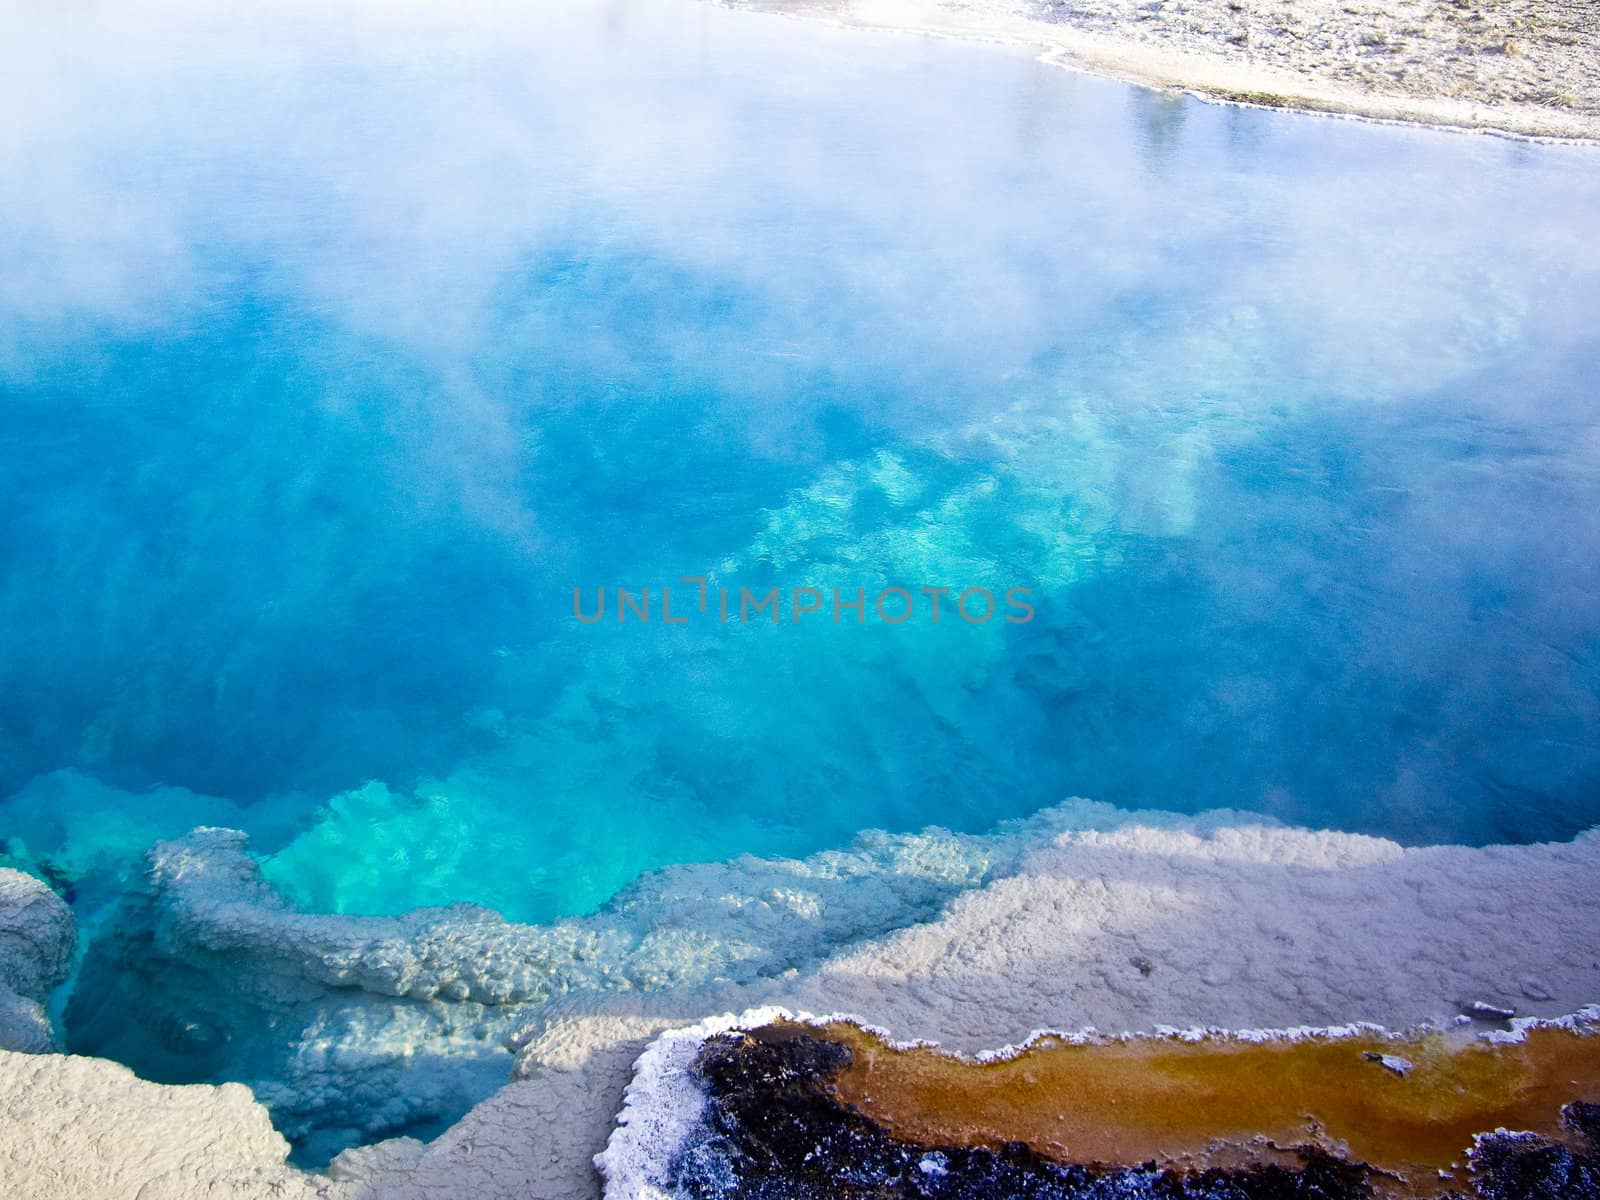 Steaming blue thermal pool Yellowstone  by emattil